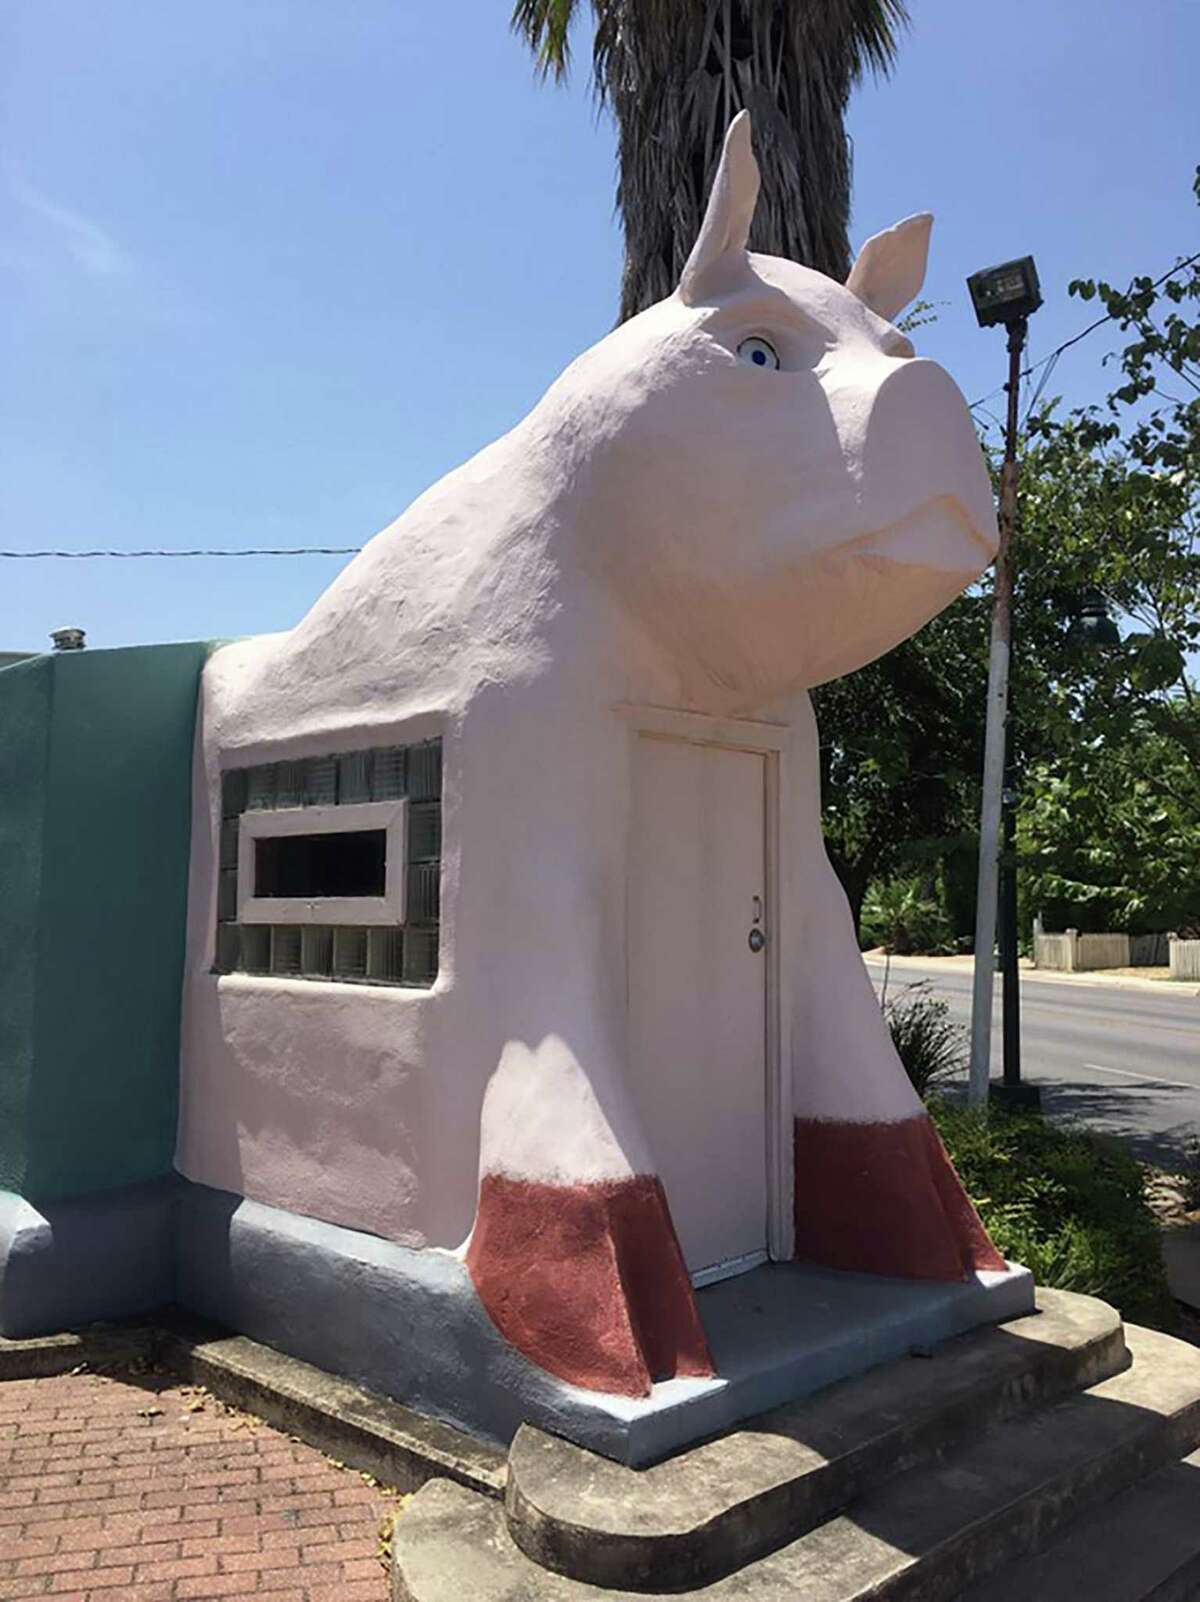 The left-behind Frank's Hog Stand structure  The giant pig is thought to have been a shelter for carhops back in the day of pig stands. It was lost for some years until it was rediscovered in the early 1990s outside of San Antonio. The structure was returned to Southtown and was restored by artist Carlos Cortes, according to RoadsideAmerica.com. It is located at the corner of South St. Mary's and Pereida streets/